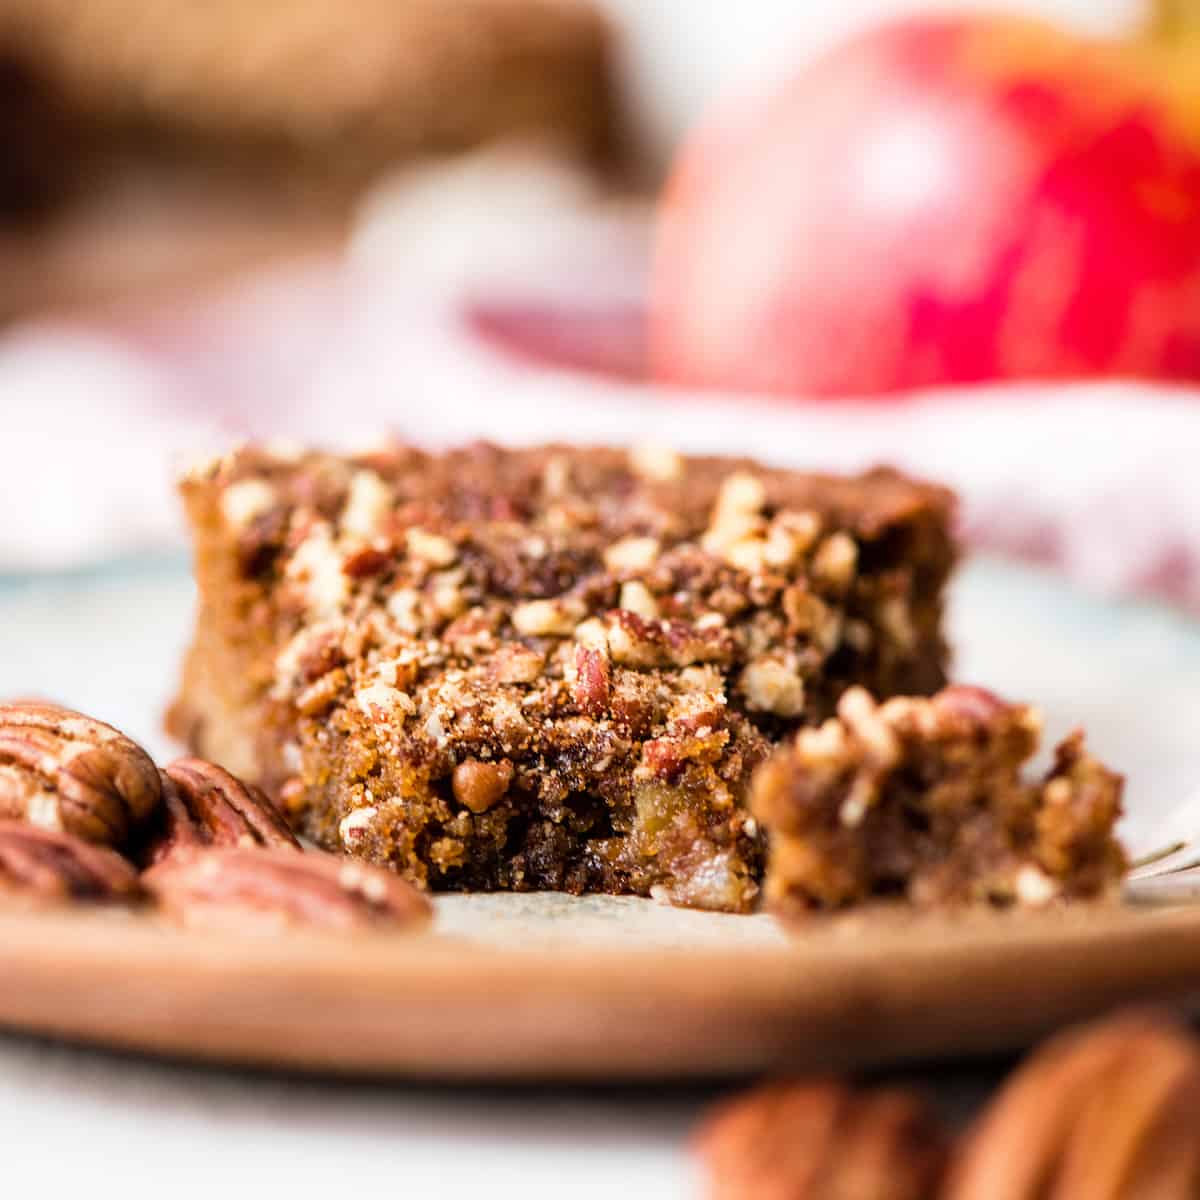 Front view of a piece of paleo gluten-free apple cake on a plate with a bite taken out of it